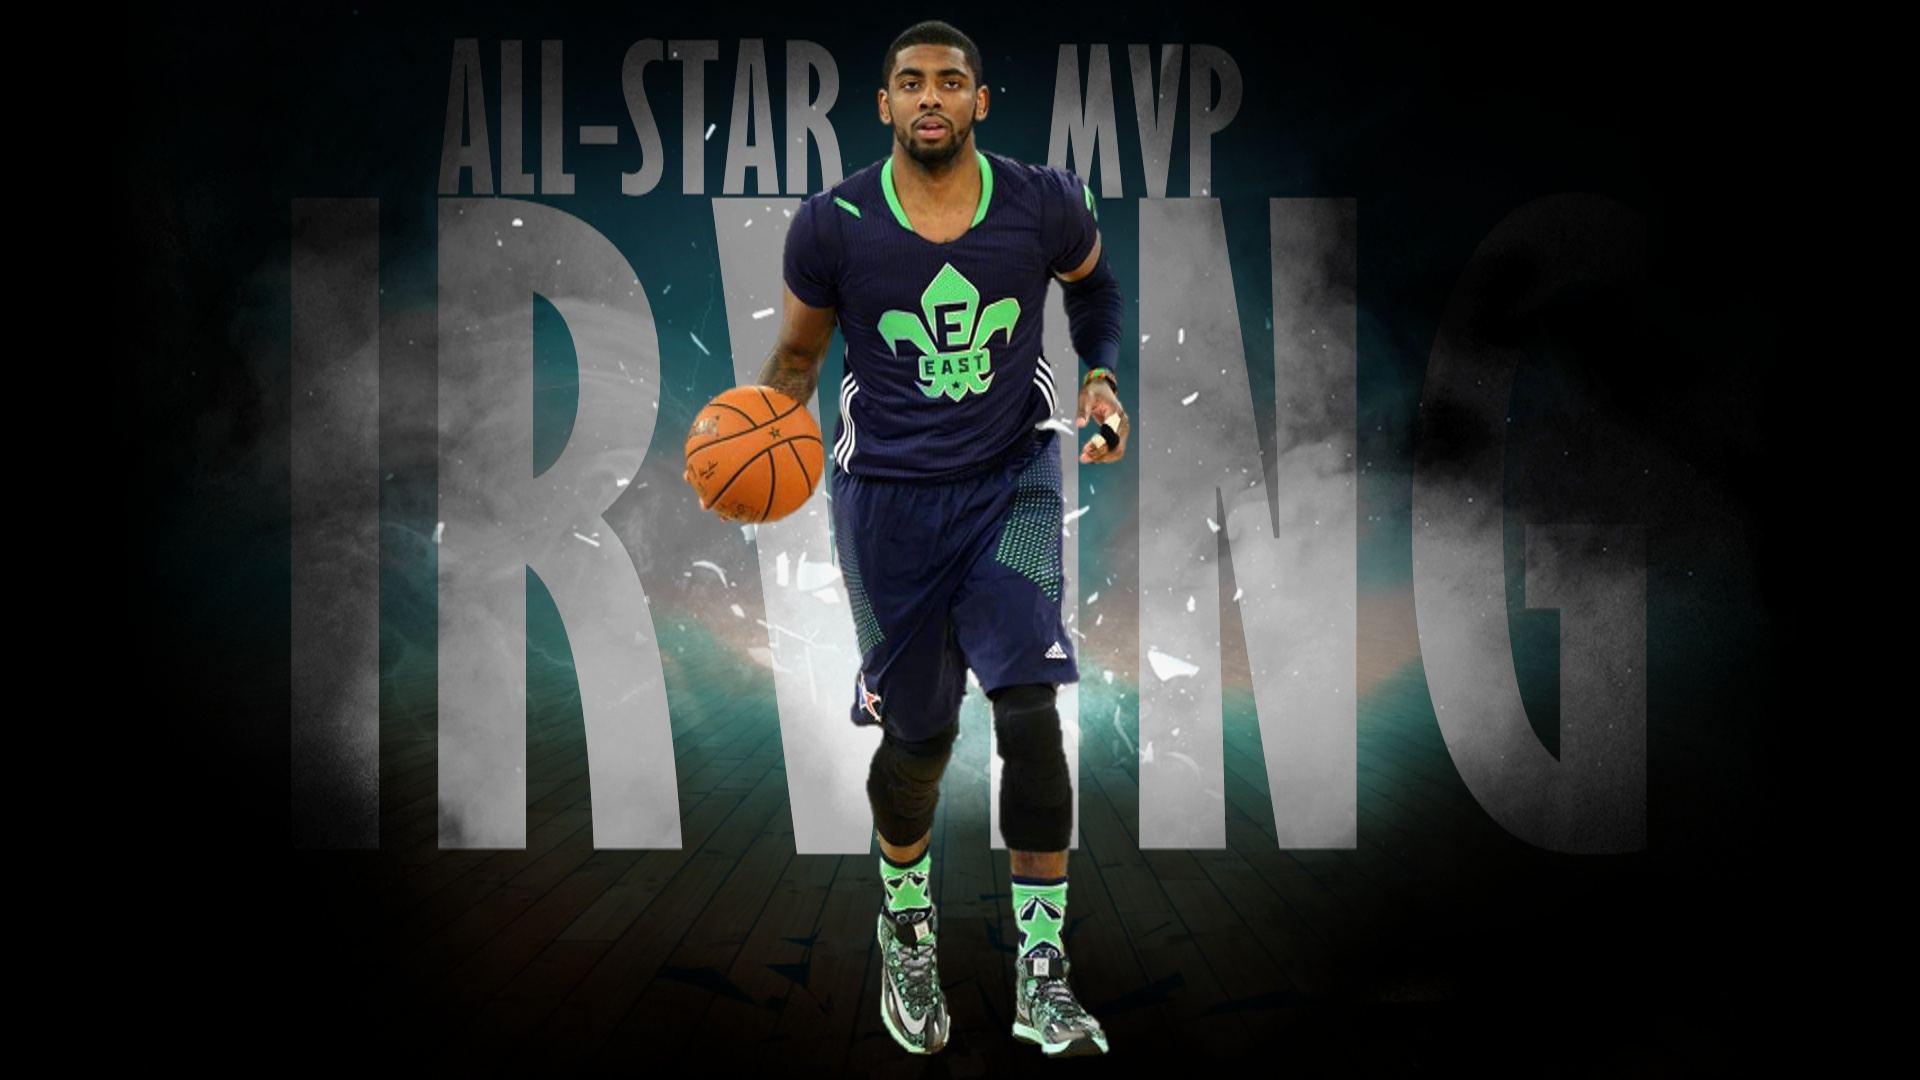 Wallpaper.wiki Awesome Kyrie Irving Wallpaper PIC WPC00400